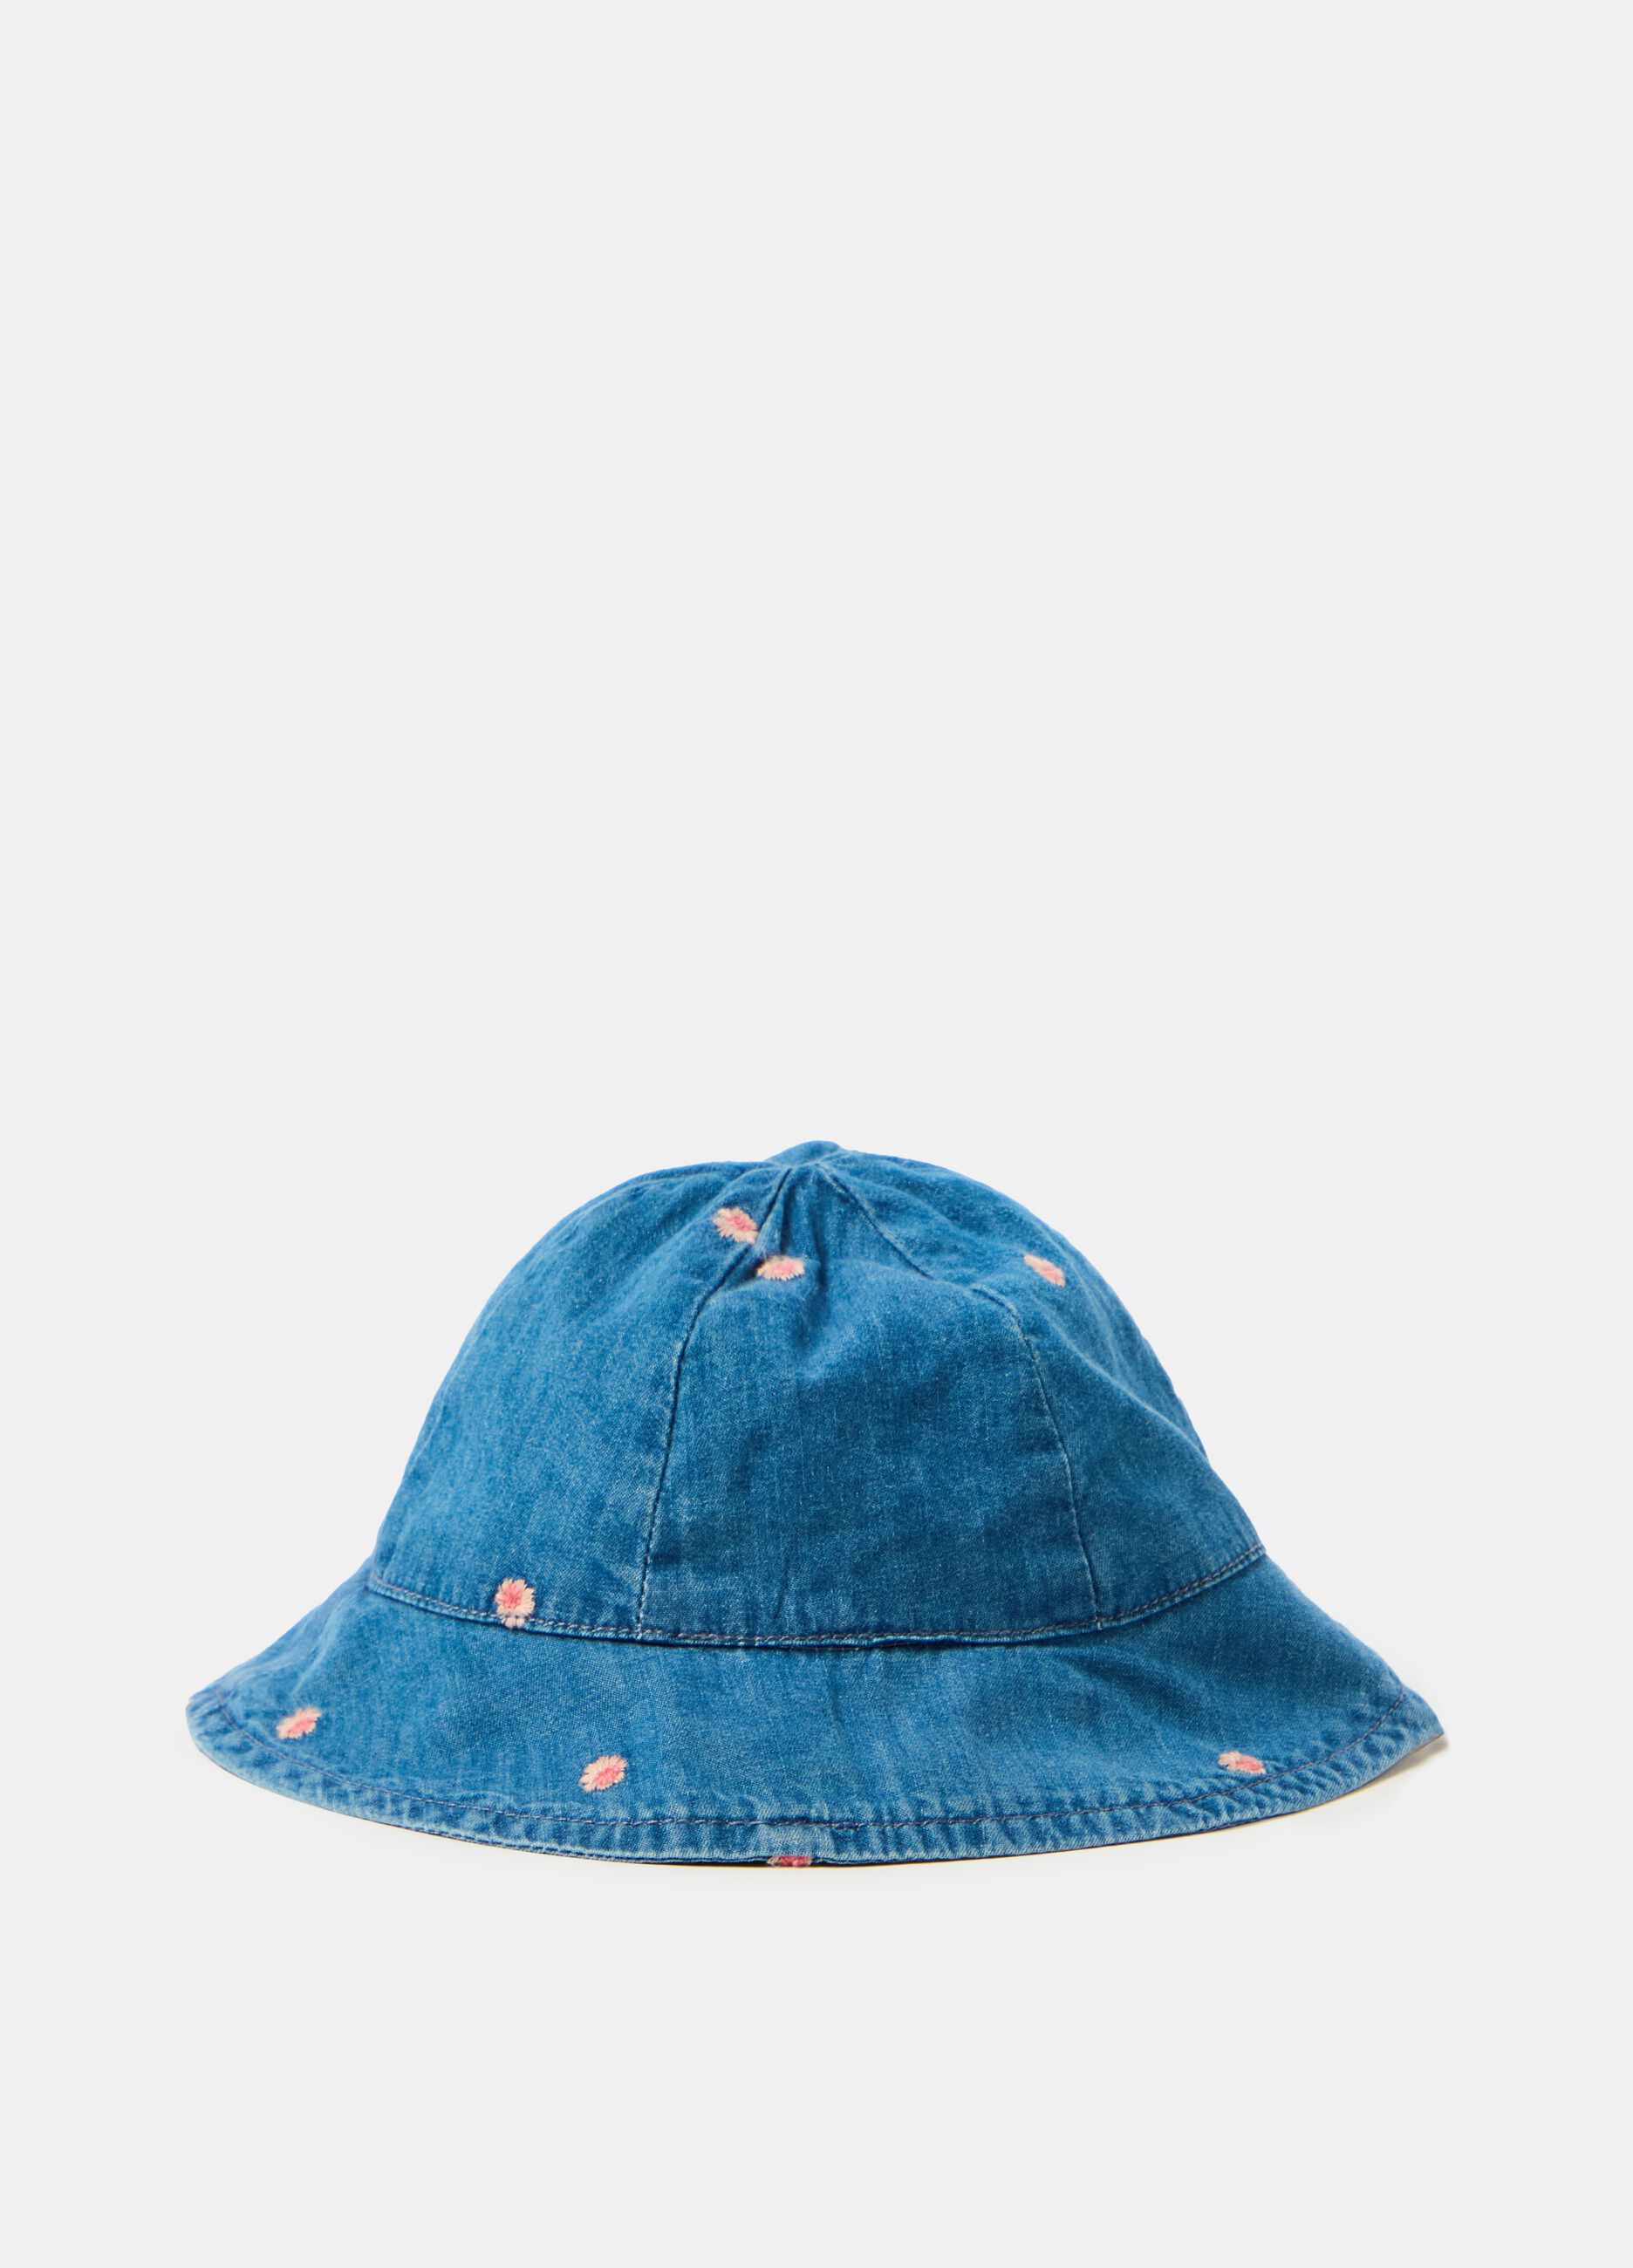 Fishing hat in denim with small flowers